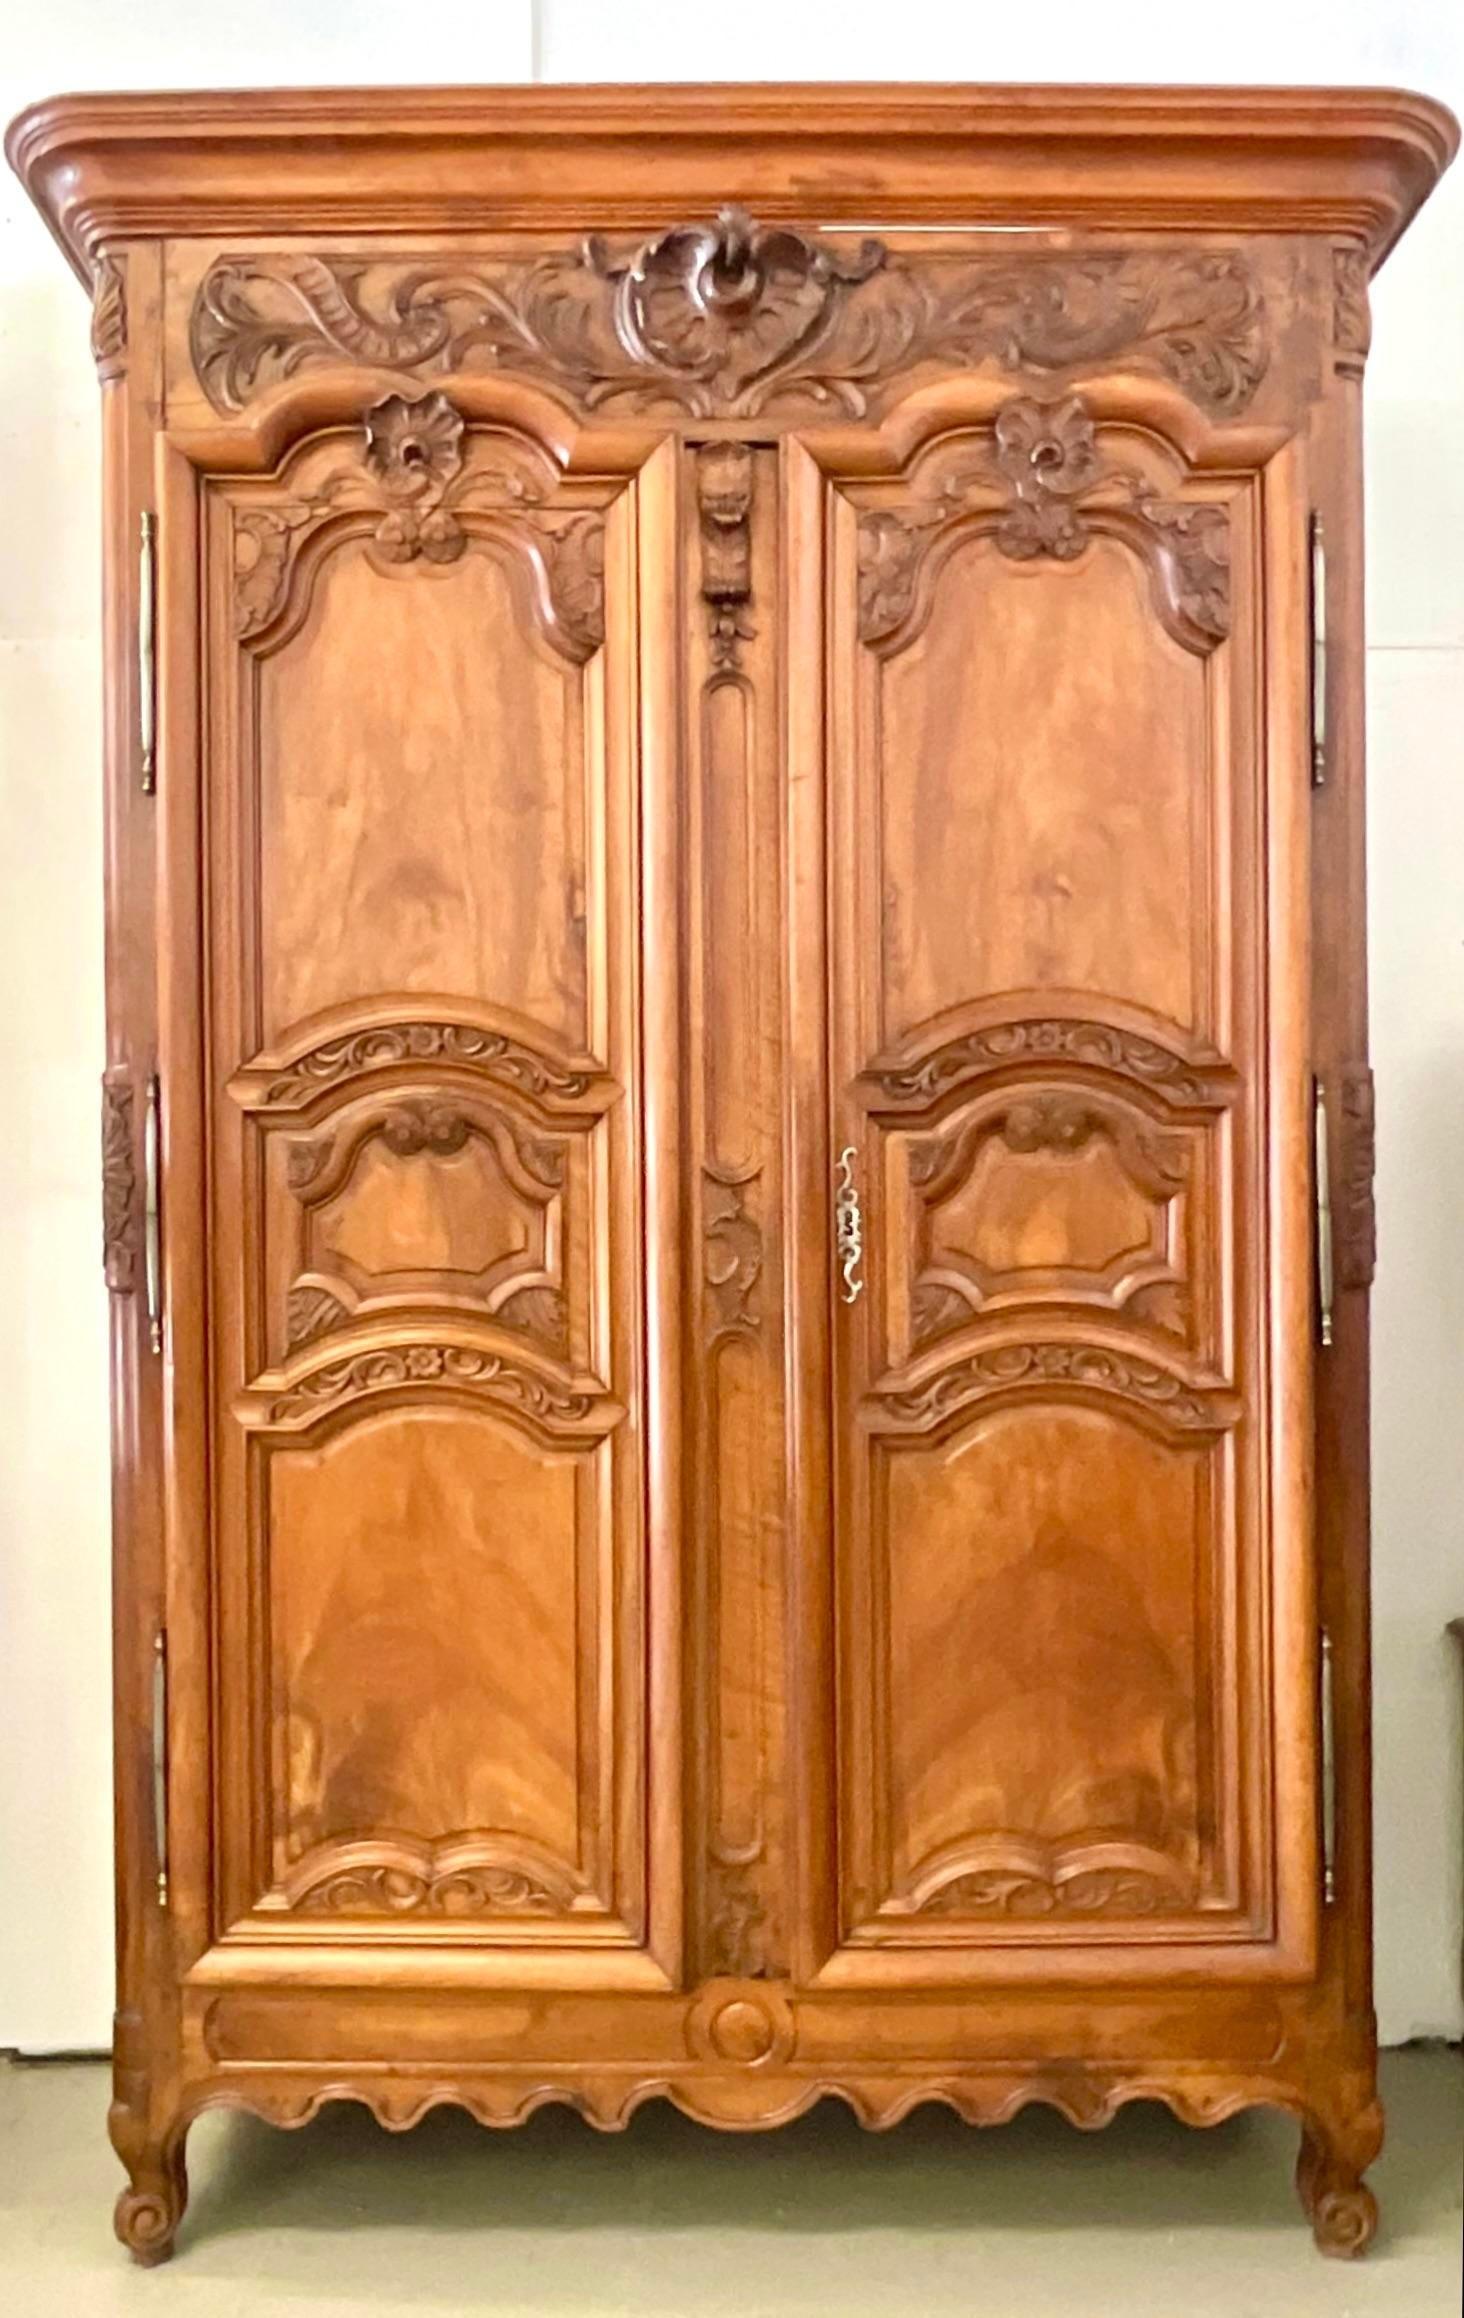 An extraordinary vintage Boho armoire. A hand carved piece with beautiful attention to detail. Monumental in size and drama. Fully lined in a slub linen. Can be used as an entertainment center or add the coordinating shelves to use it for storage.